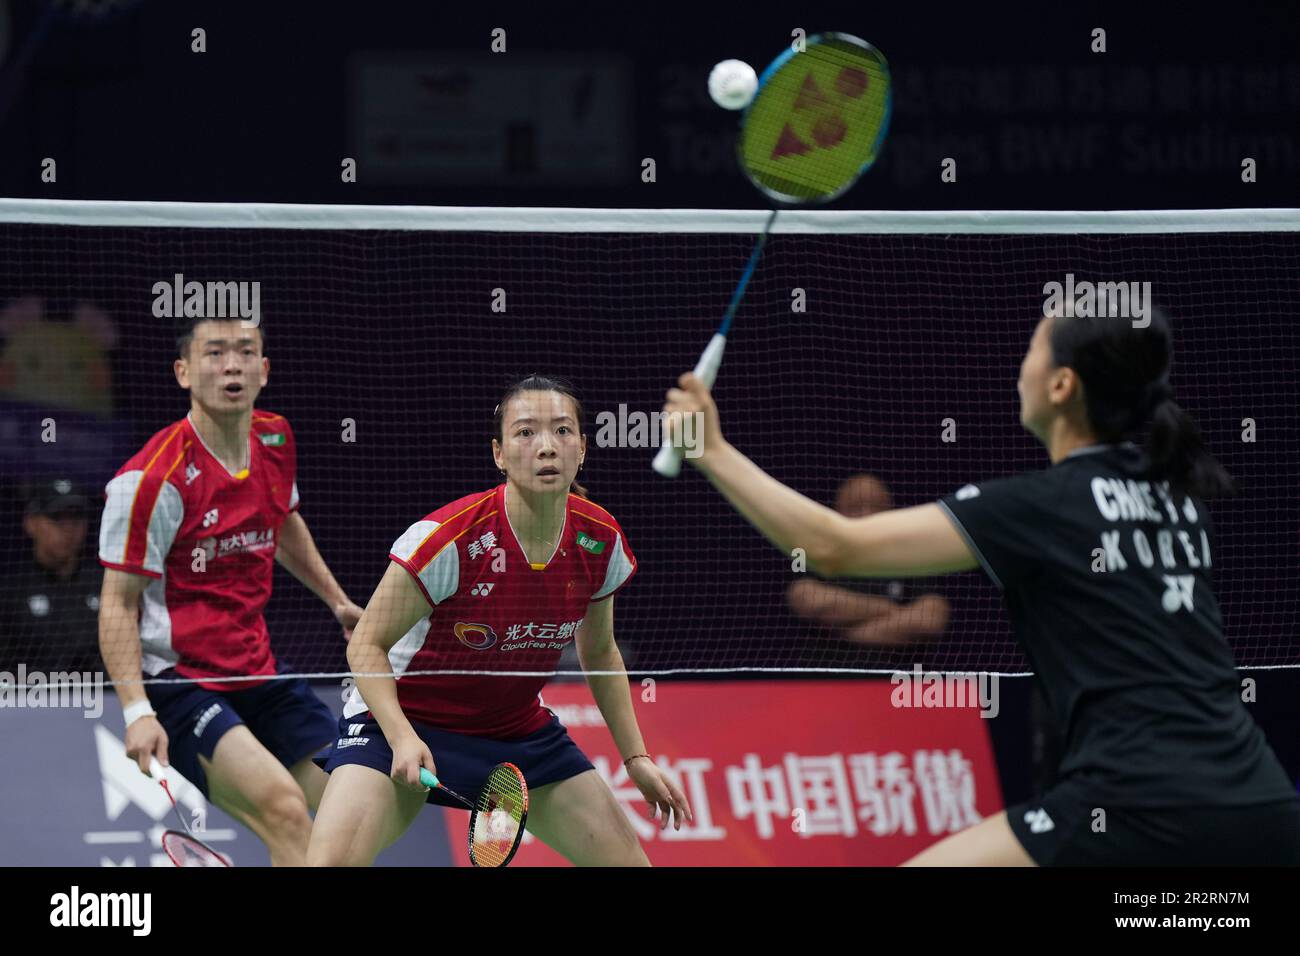 Huang Yaqiong, center, and teammate Zheng Siwei of China watch Chae Yu Jung of South Korea hits a shot during their mixed doubles badminton final match at the BWF Sudirman Cup in